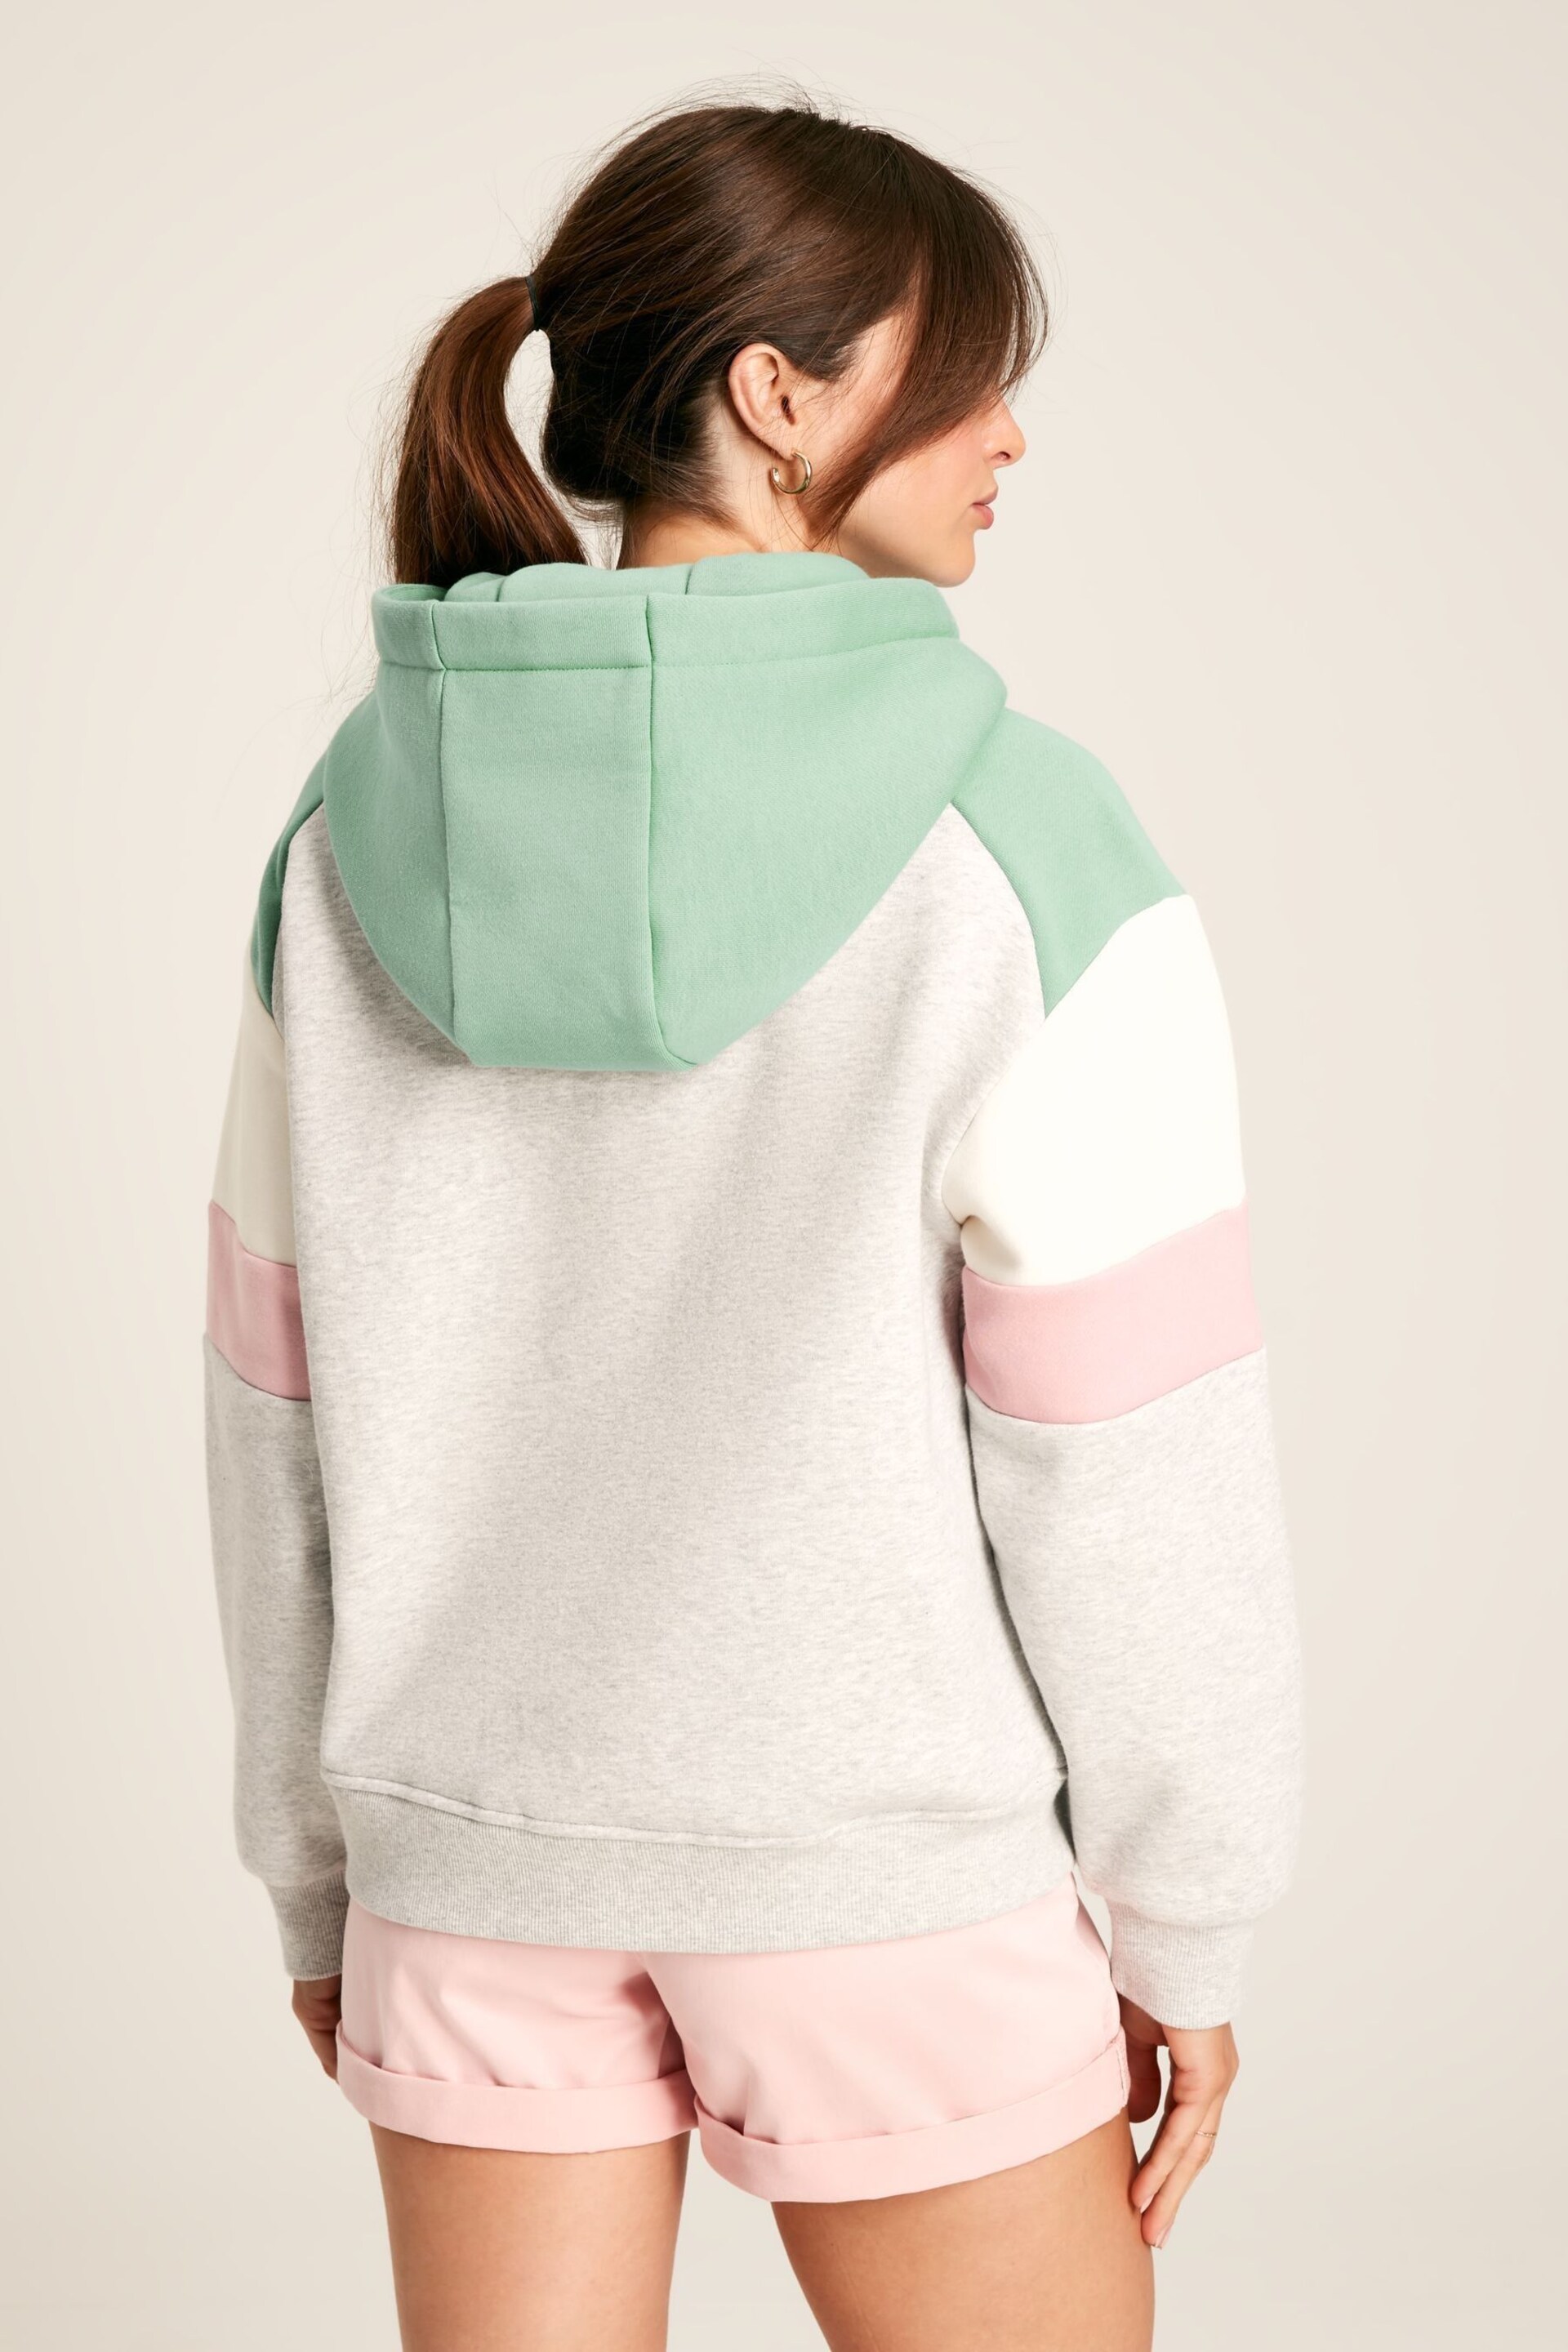 Joules Milbourne Grey, Pink & White Embroidered Hoodie - Image 3 of 8